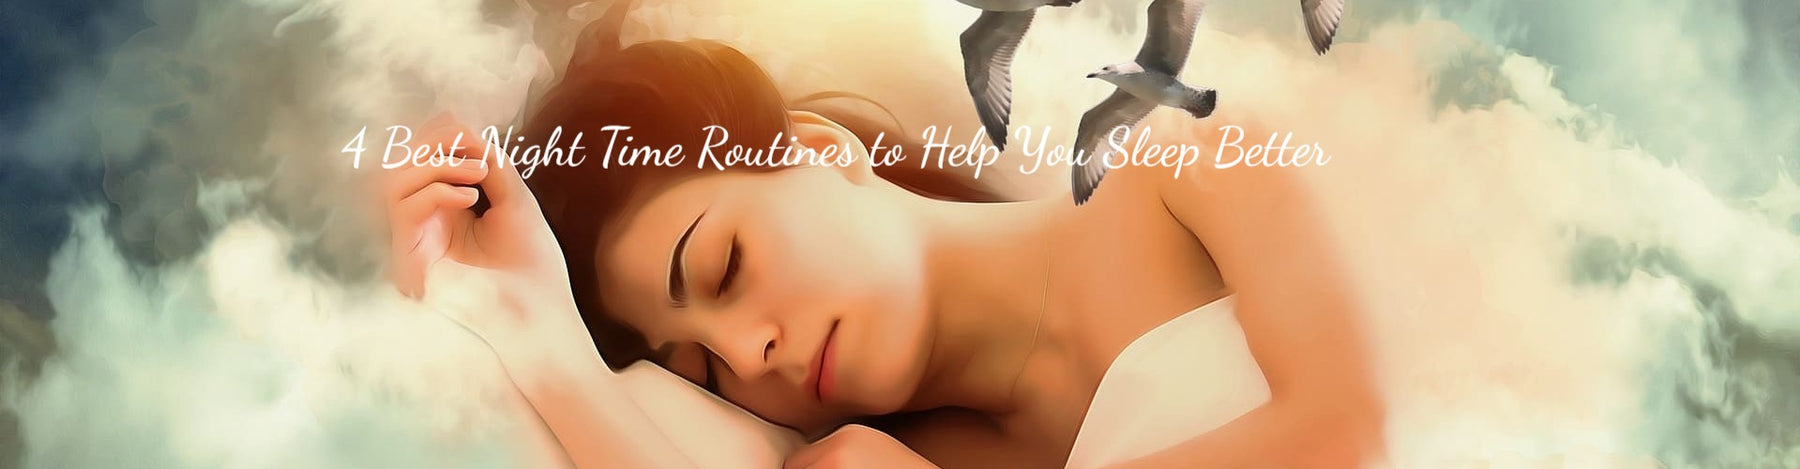 4 Best Night Time Routines to Help You Sleep Better